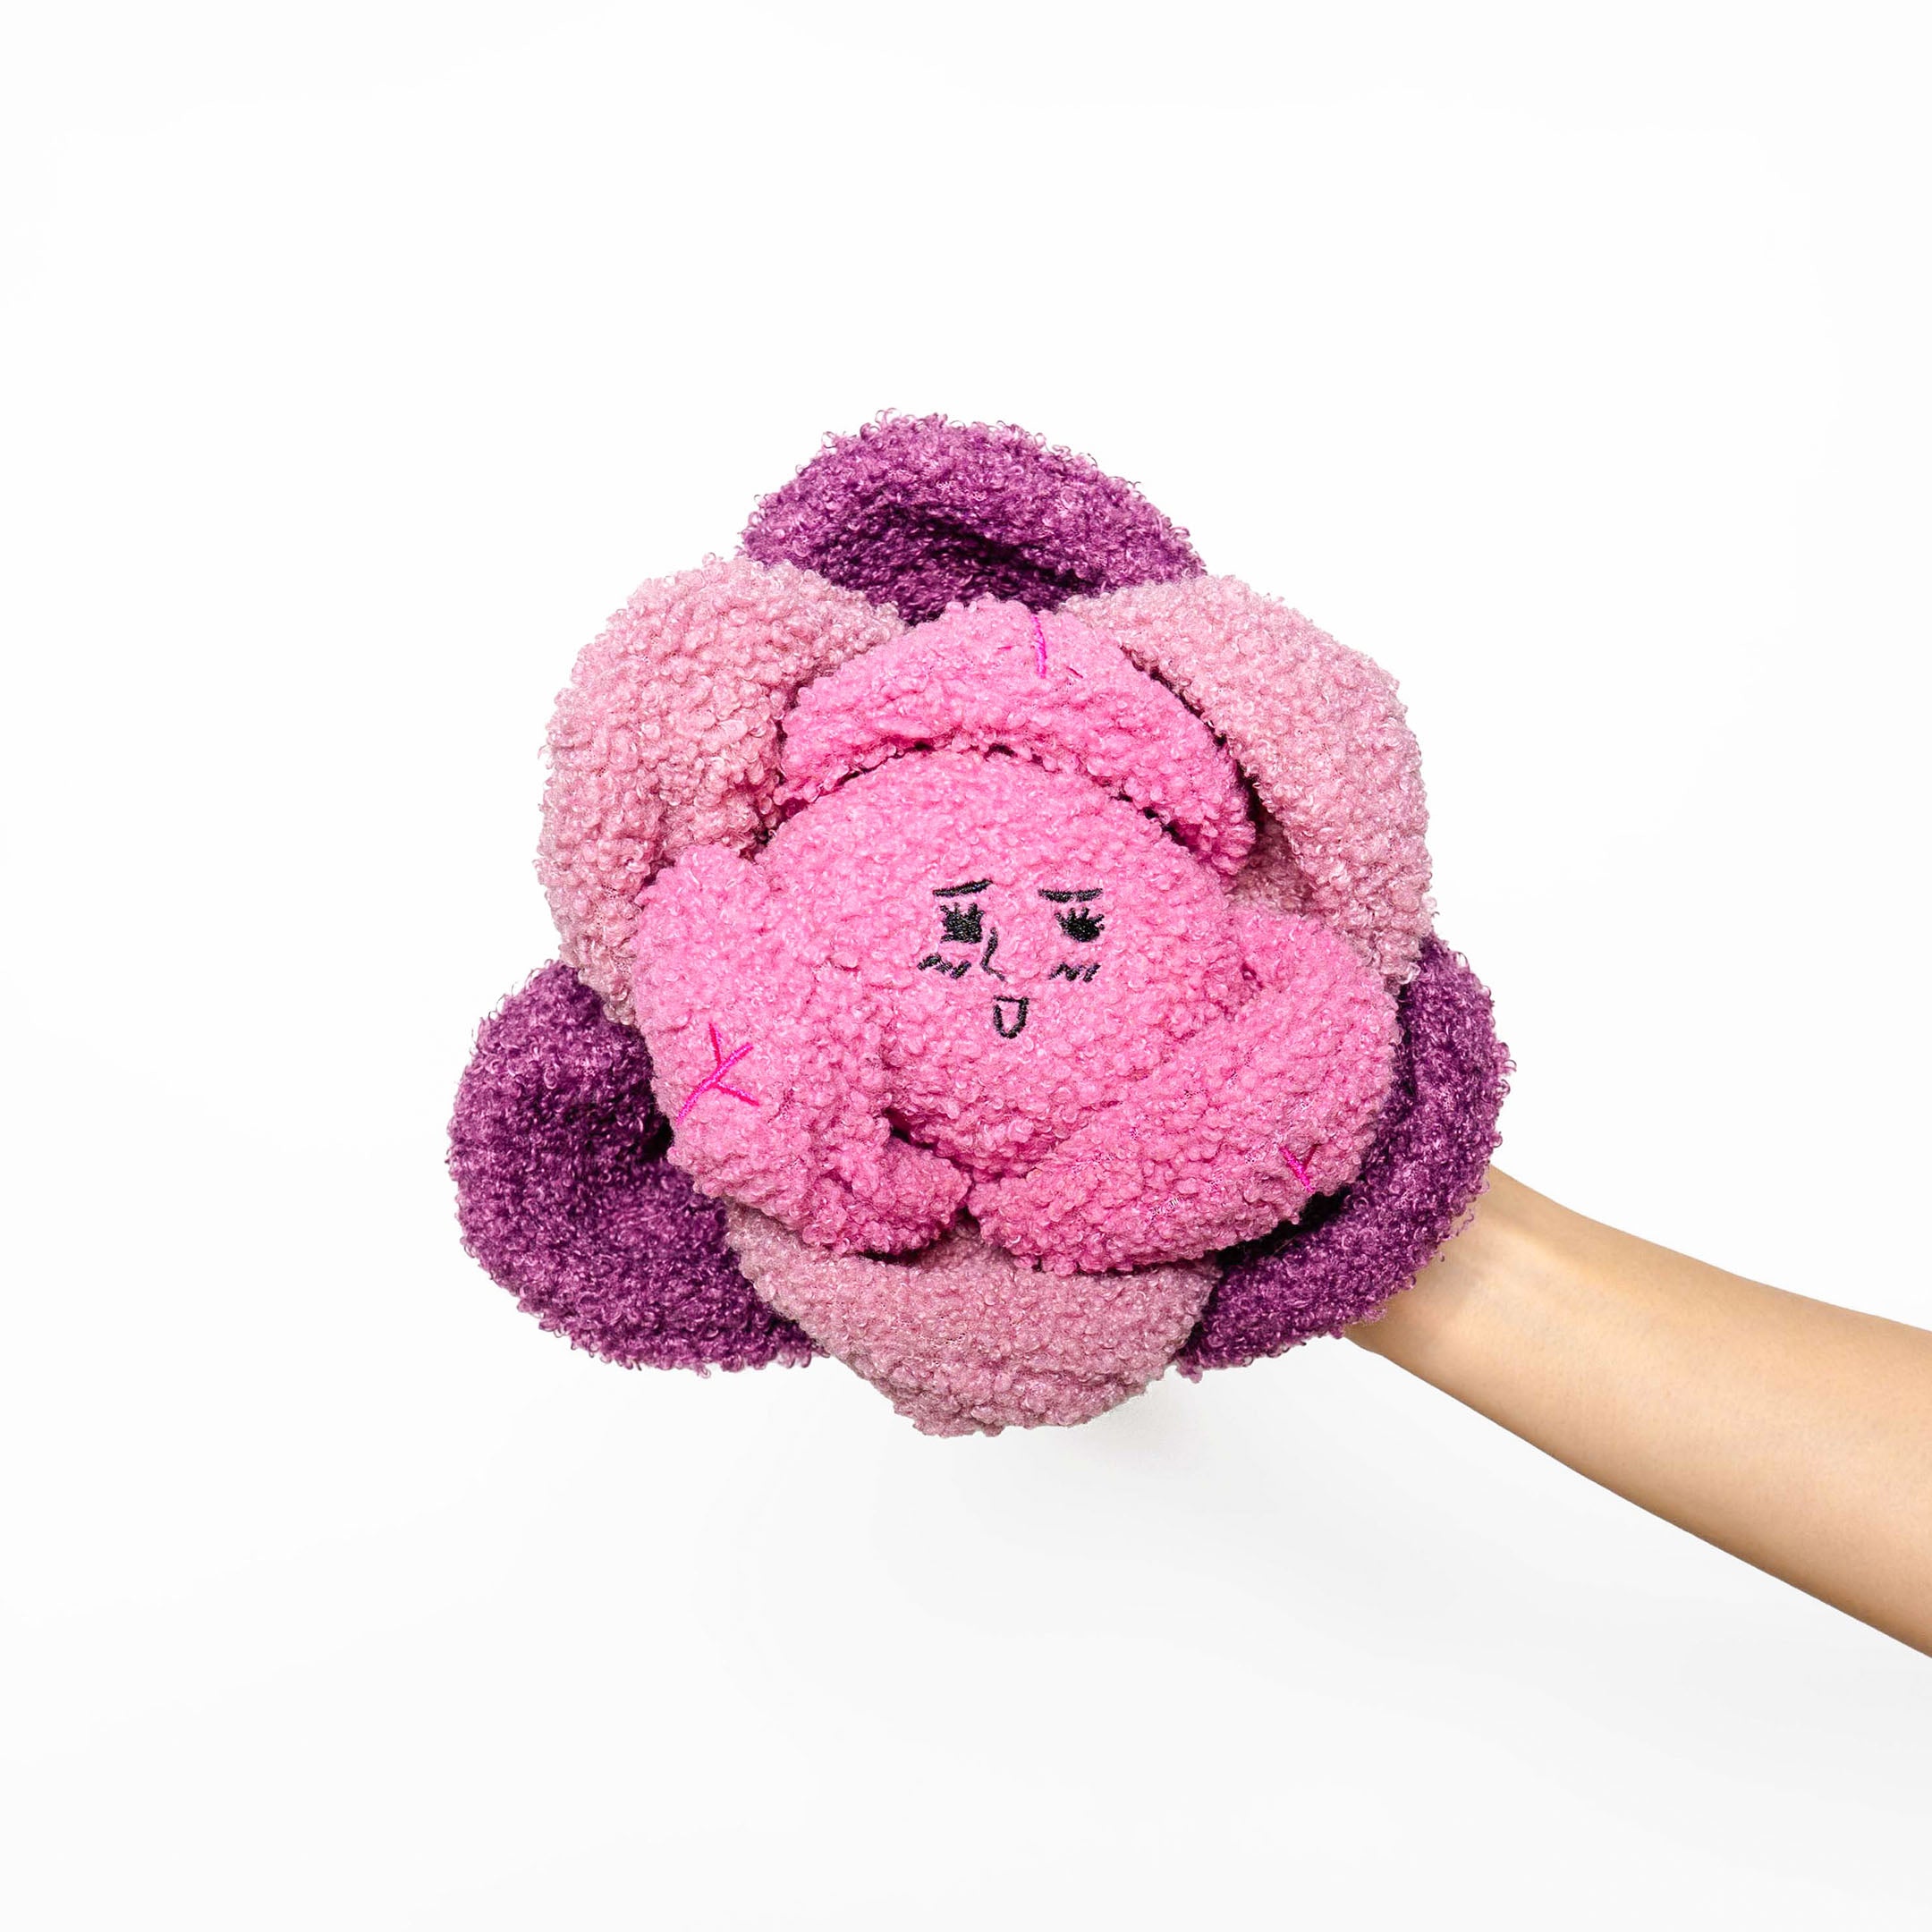 The image displays a hand holding a plush red cabbage shaped dog toy, predominantly in shades of pink with purple accents. The toy features a sleepy face embroidered on the central bulb, surrounded by soft, petal-like layers that add texture and visual interest. The bright colors and tactile elements are designed to appeal to dogs for play and engagement. Set against a white background, the toy's colors pop, suggesting a fun and engaging design for a pet's playtime.